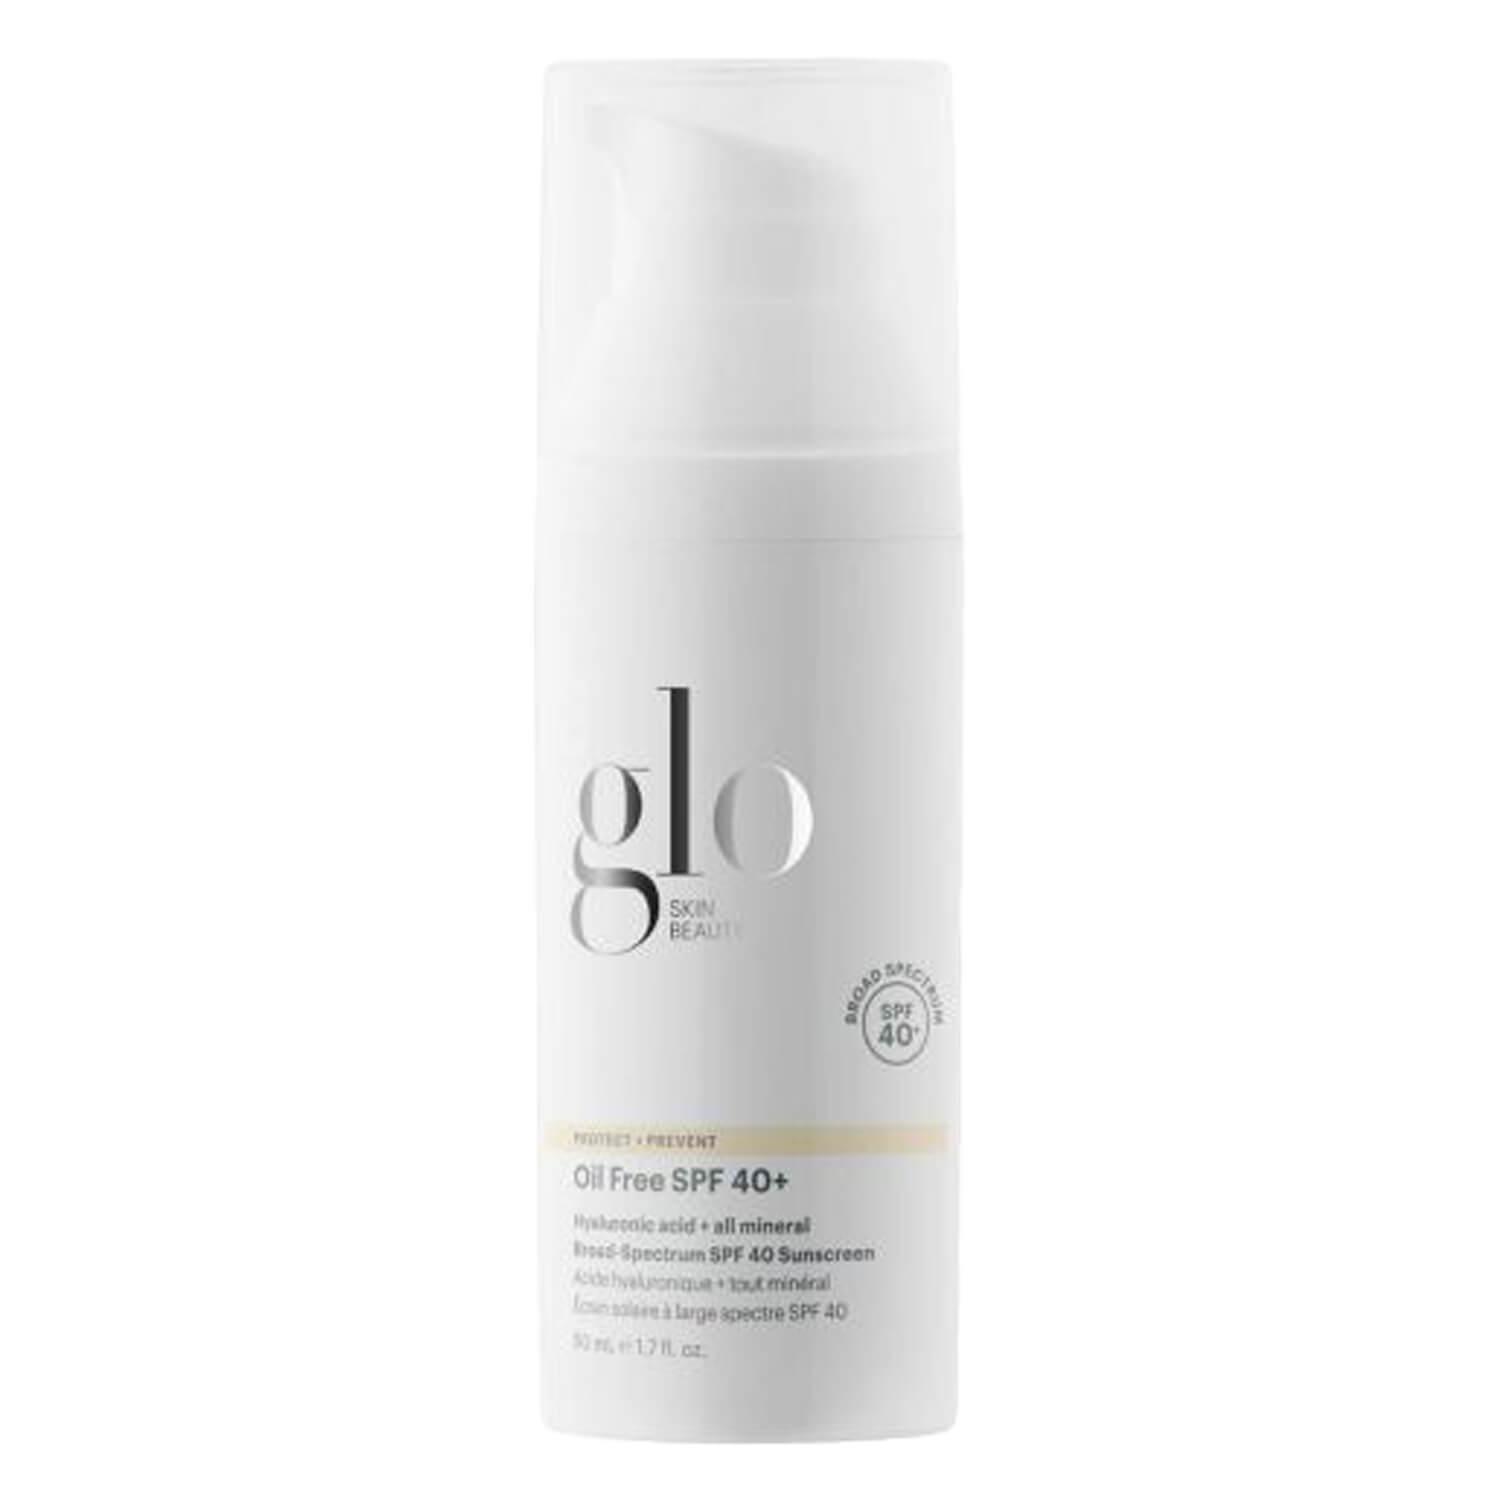 Glo Skin Beauty Care - Protect + Prevent Sunscreen Oil Free SPF 40+